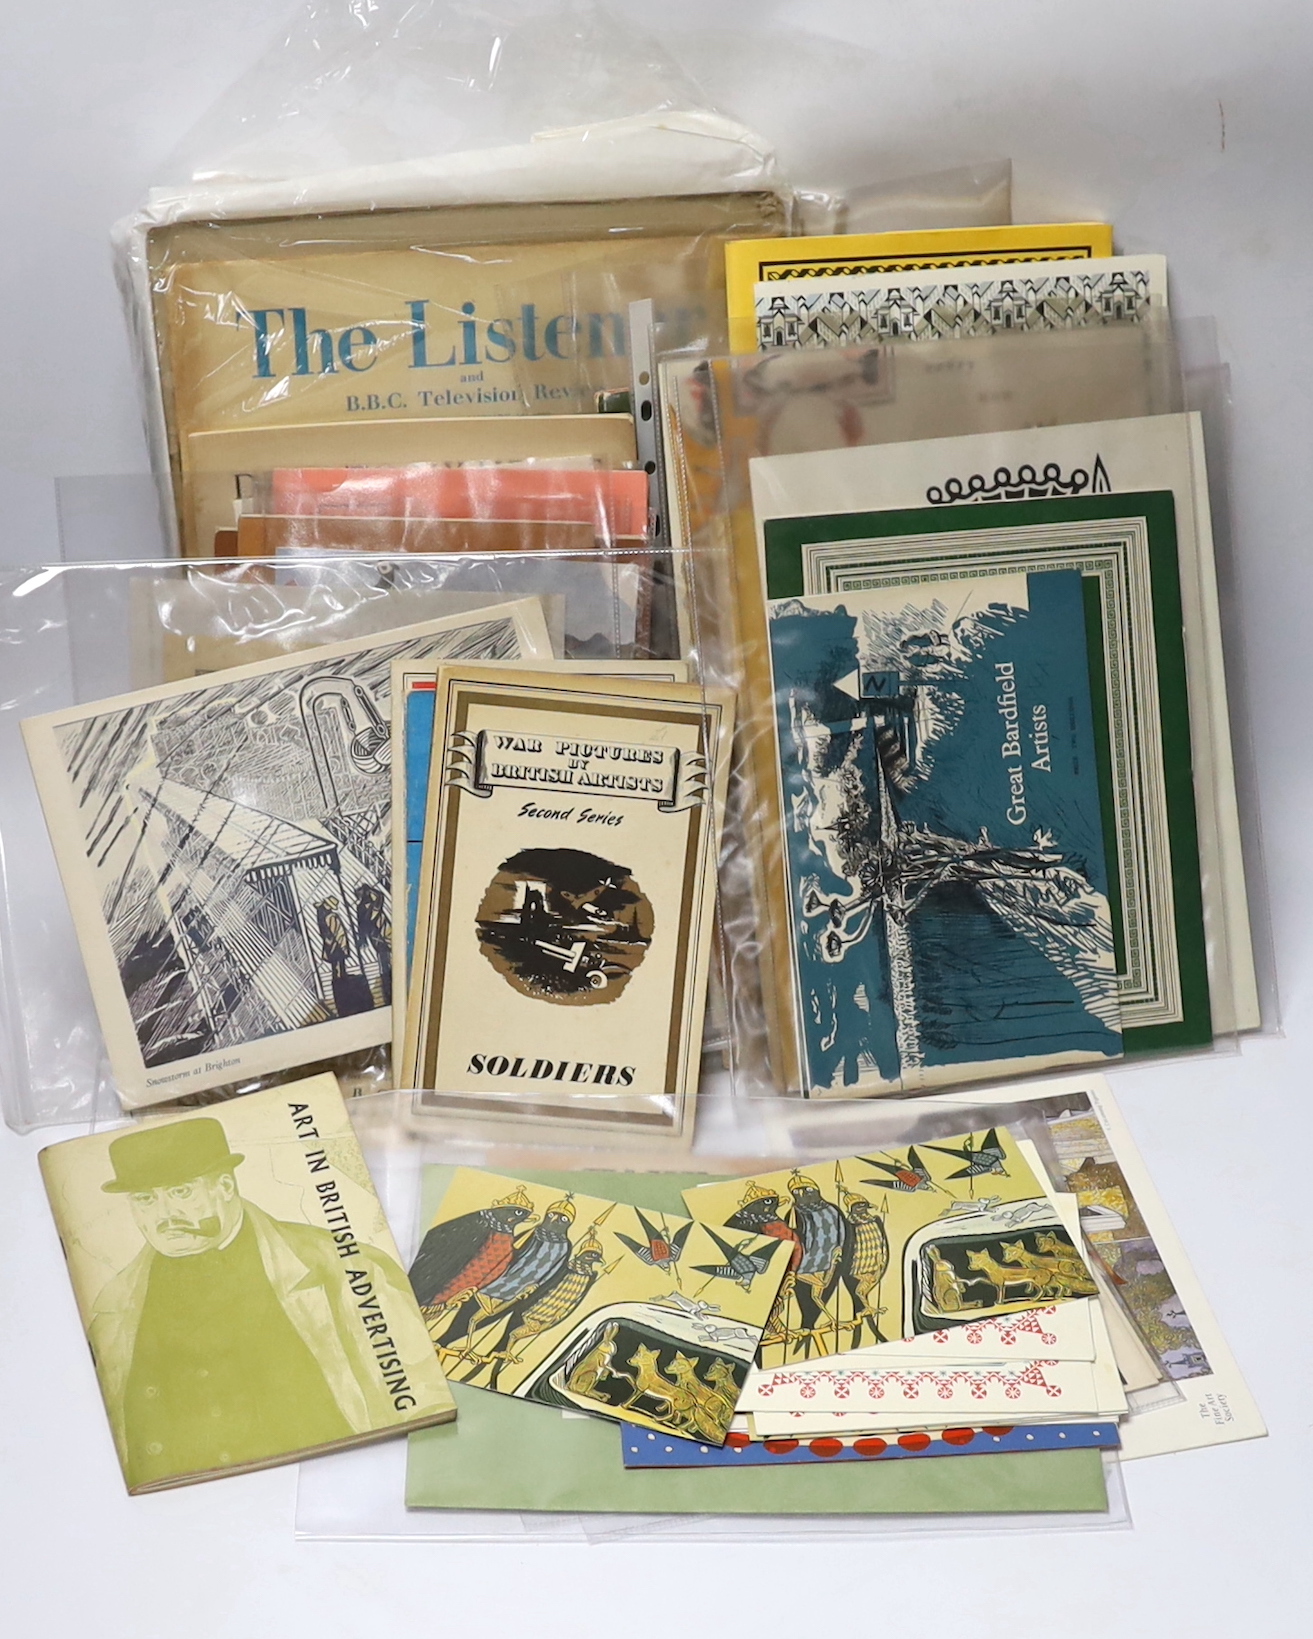 Bawden, Edward - A large collection of booklets, catalogues, periodicals etc., illustrated by, or including illustrations by, Edward Bawden, including:- Serjeant, R.B. - The Arabs, 1947; The Listener and B.B.C. Televisio